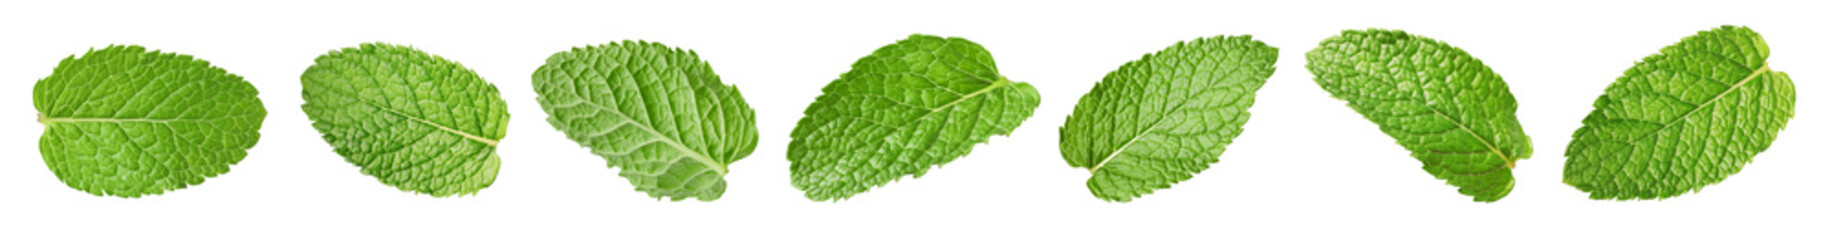 Poster - Many fresh mint leaves isolated on white